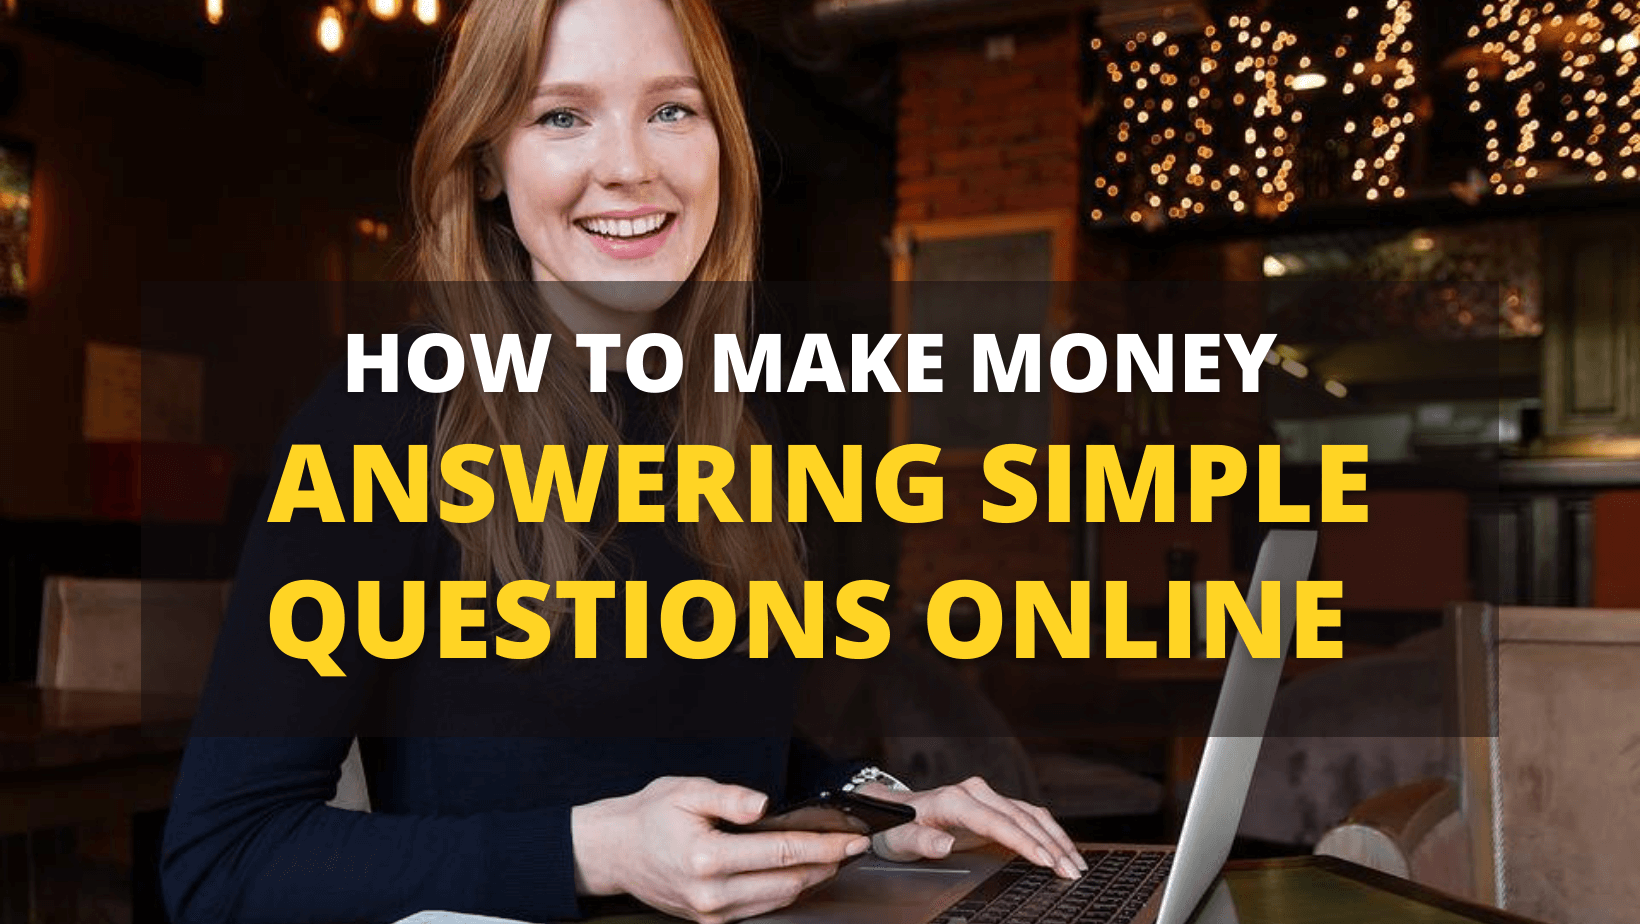 Money Answering Simple Questions online